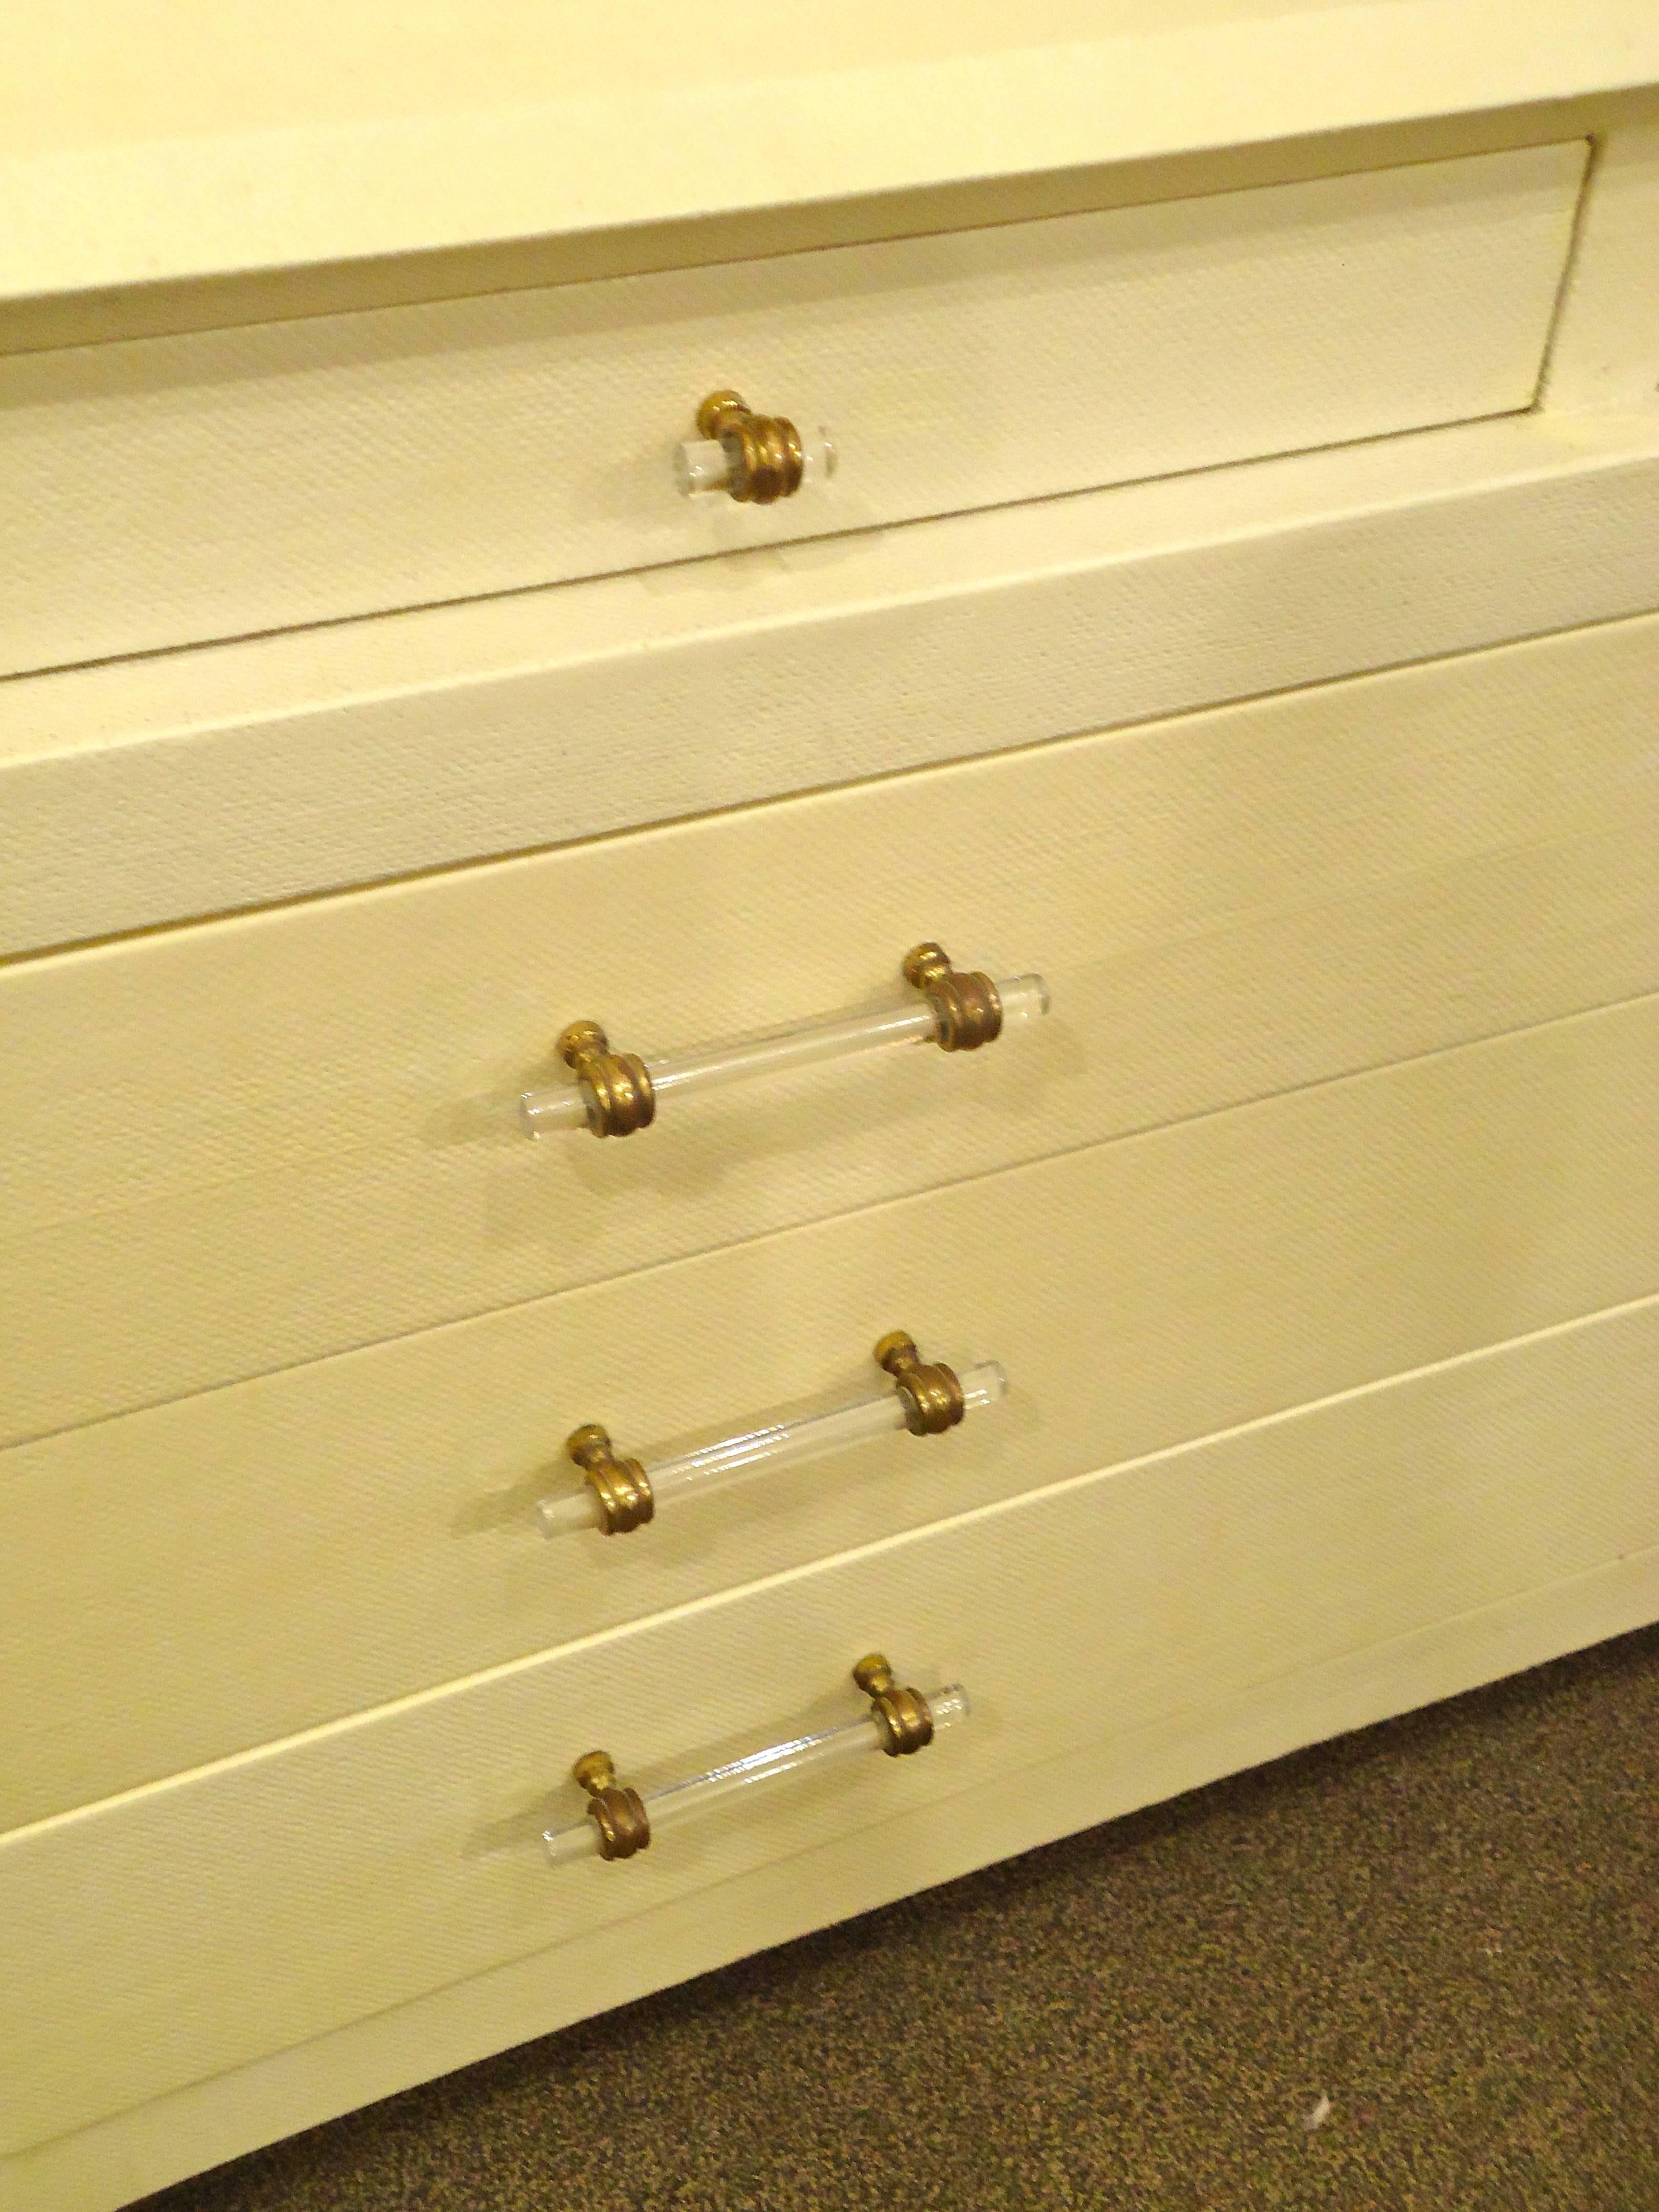 Smart and tailored stepped design having two narrower drawers on the top tier, three larger but still sleek drawers on the bottom. Wrapped in a cream colored linen and finished with cool Lucite and brass hardware.  Finished on the back too!